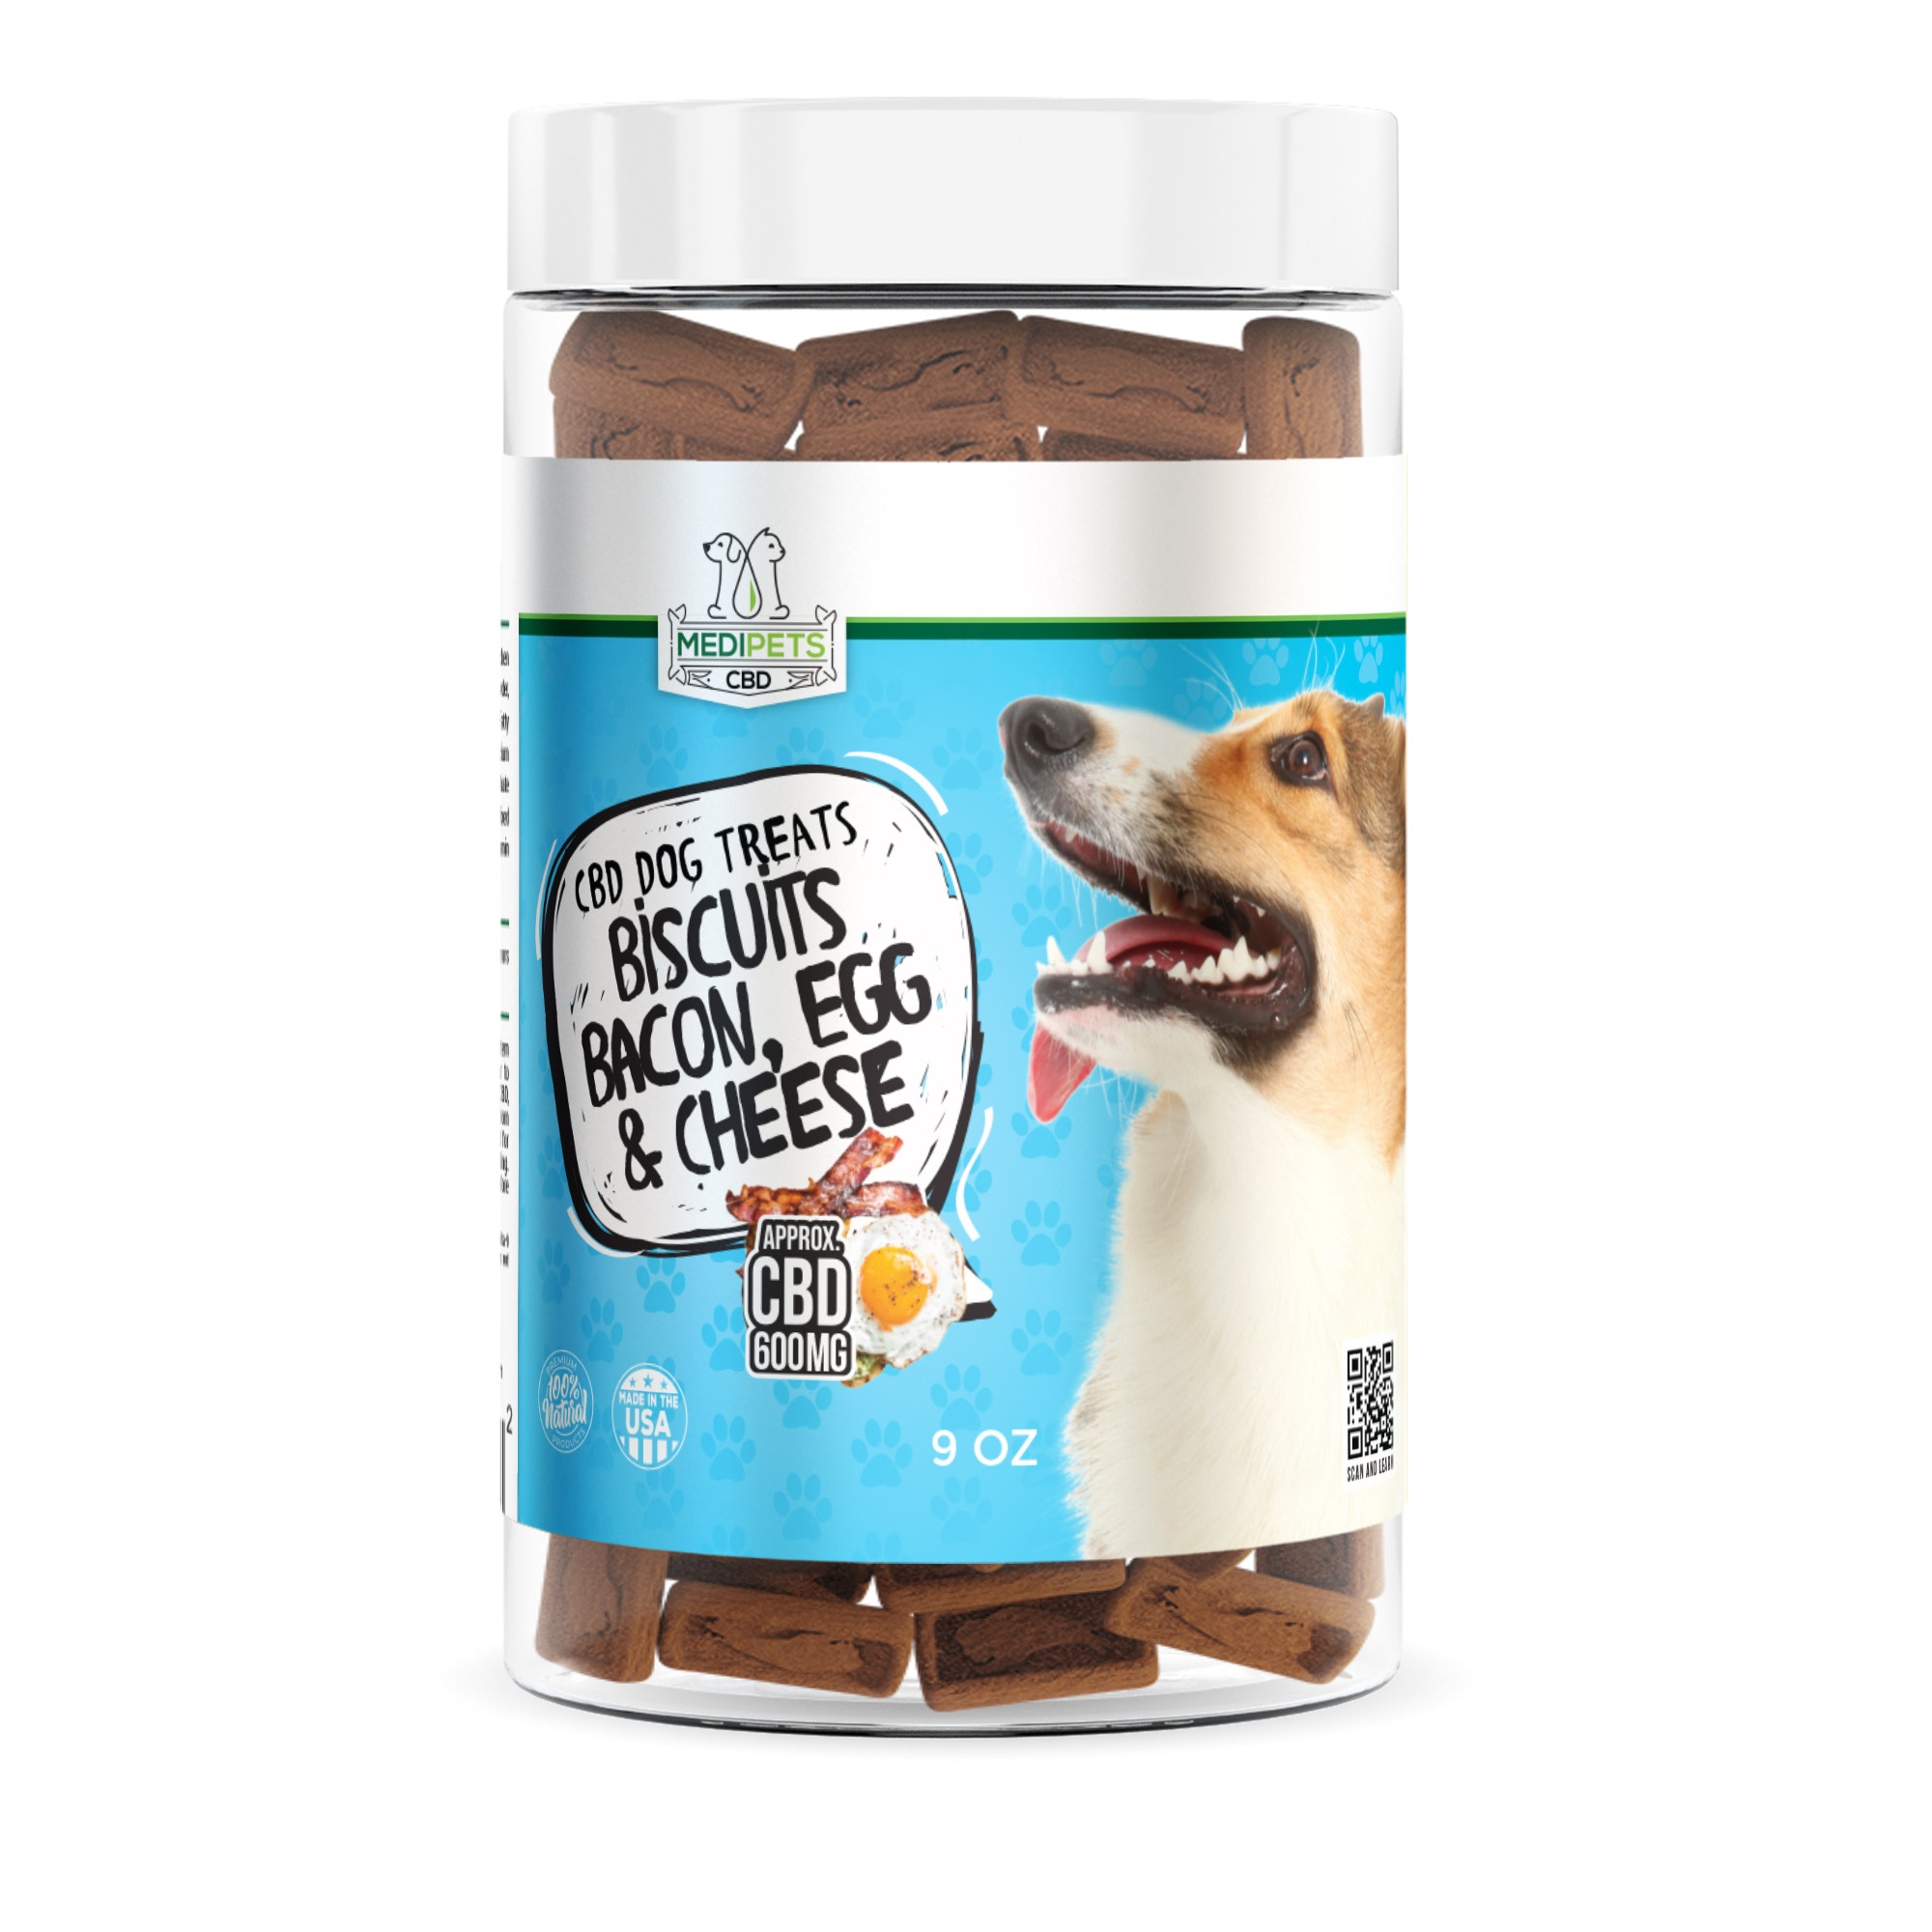 MediPets CBD Dog Treats - Biscuits Bacon